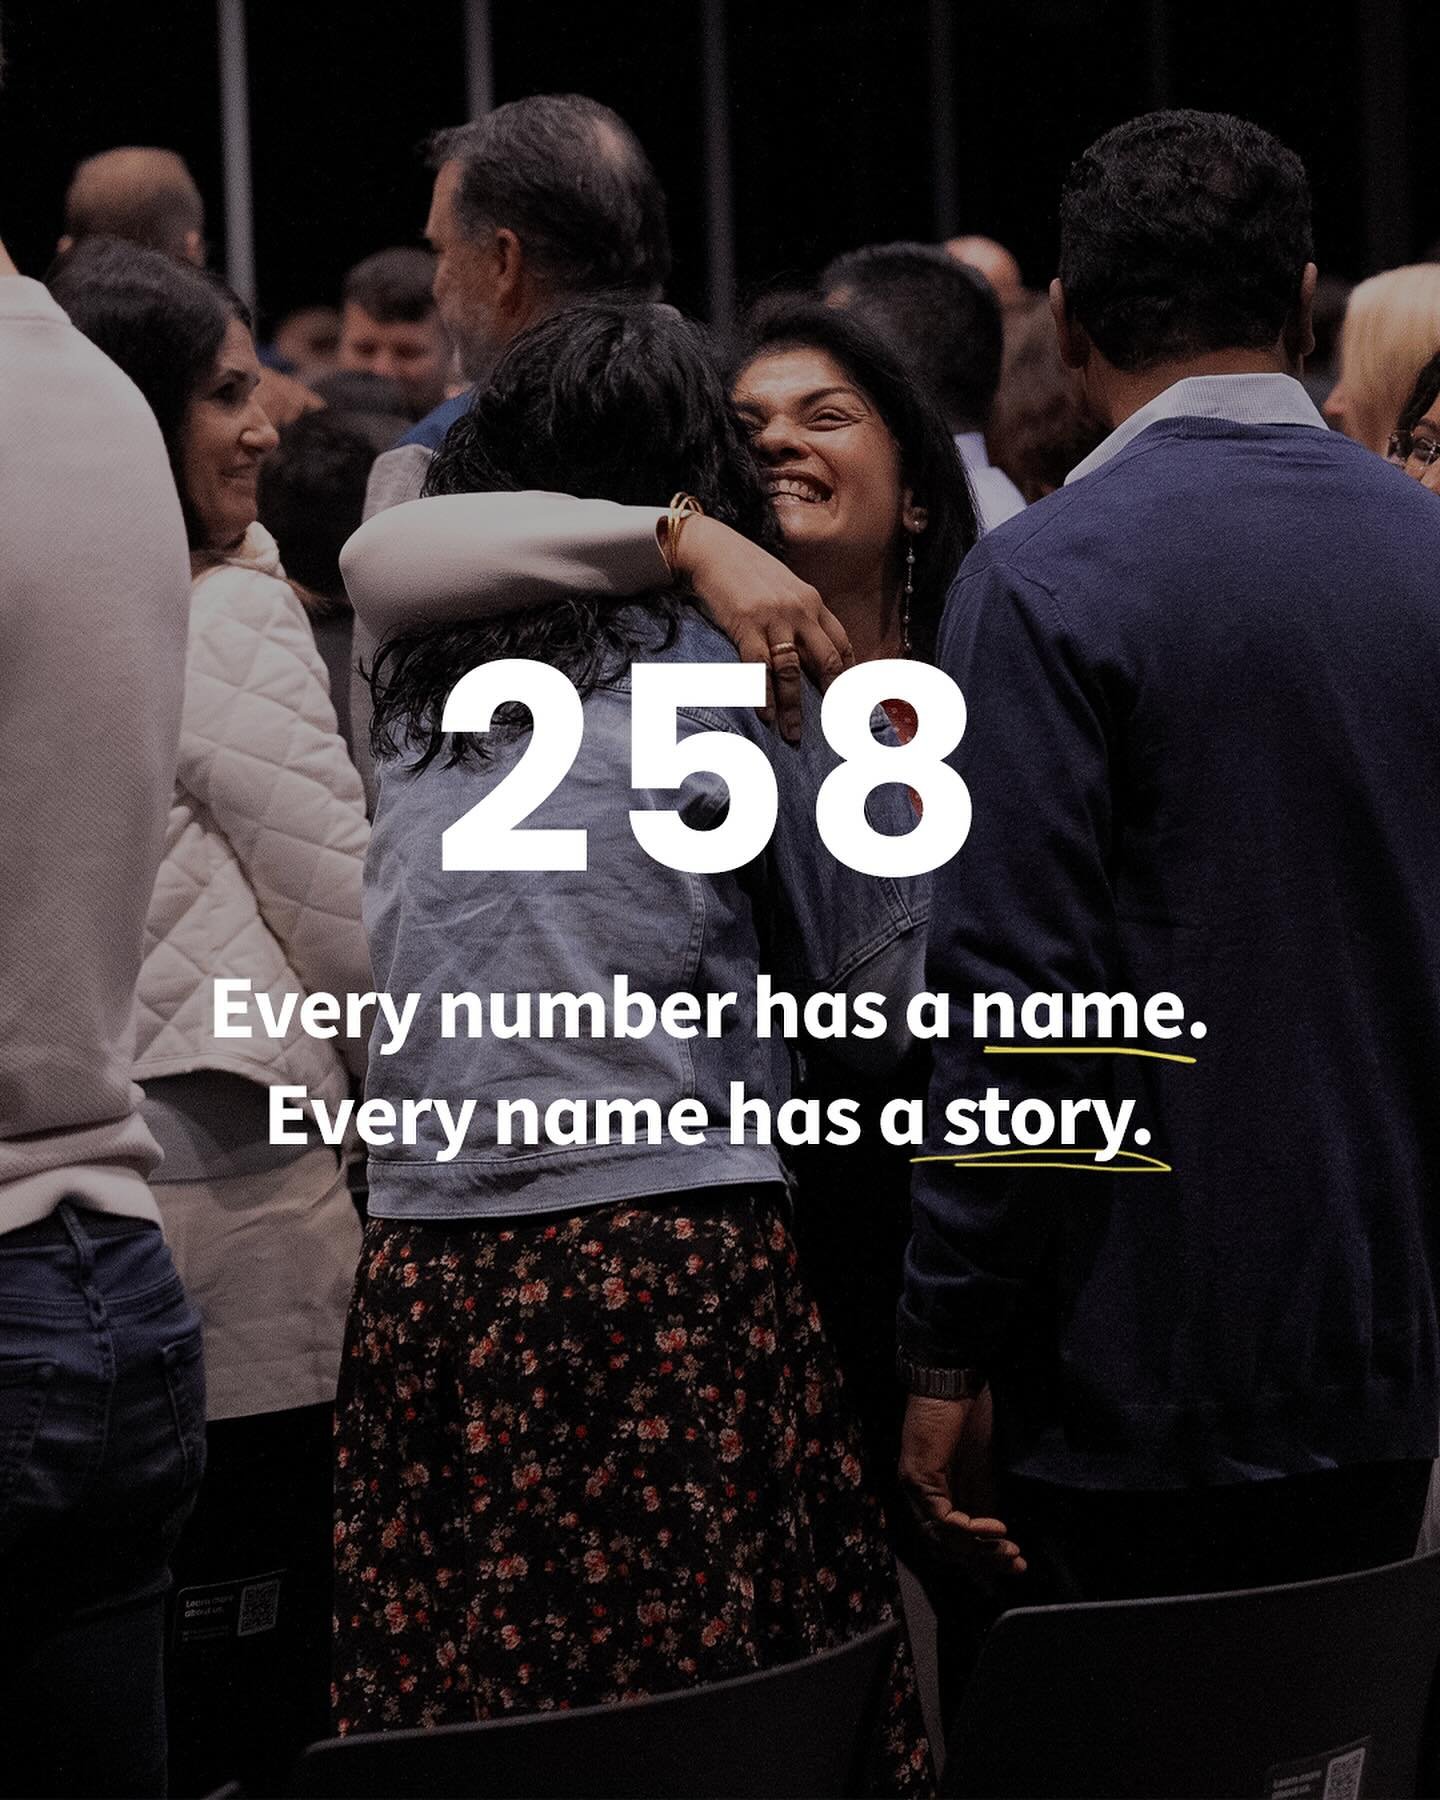 We don&rsquo;t usually share a lot of numbers. But God did amazing things at Easter and we want to celebrate with you. 

Every number has a name.
Every name has a story.

God changed people&rsquo;s stories on Easter. Not because of us but in spite of